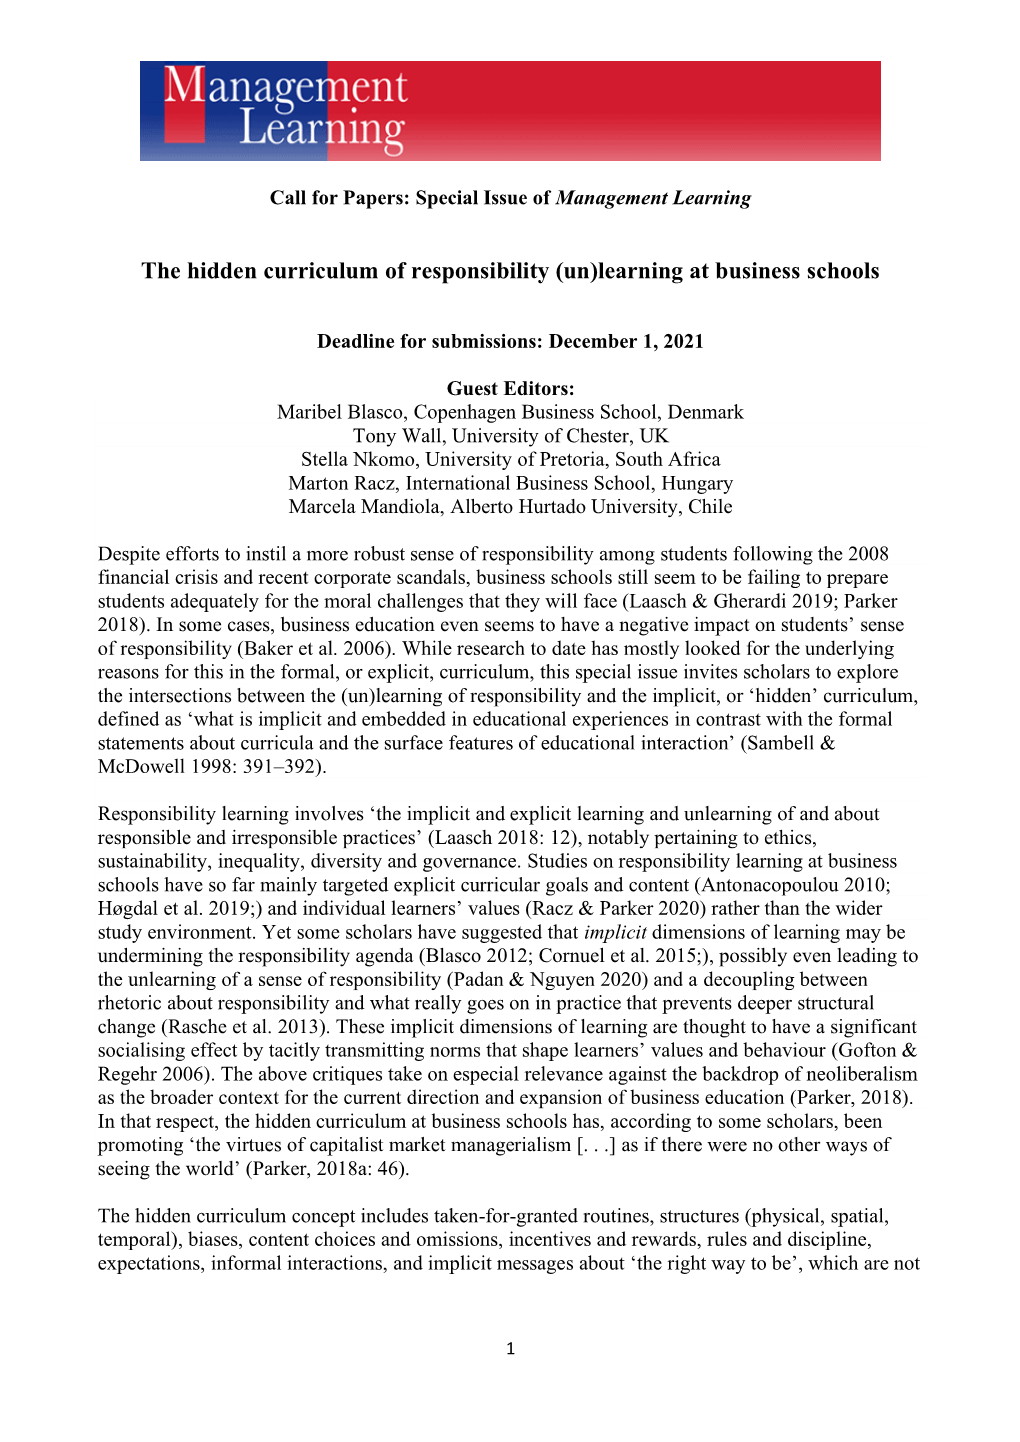 The Hidden Curriculum of Responsibility (Un)Learning at Business Schools